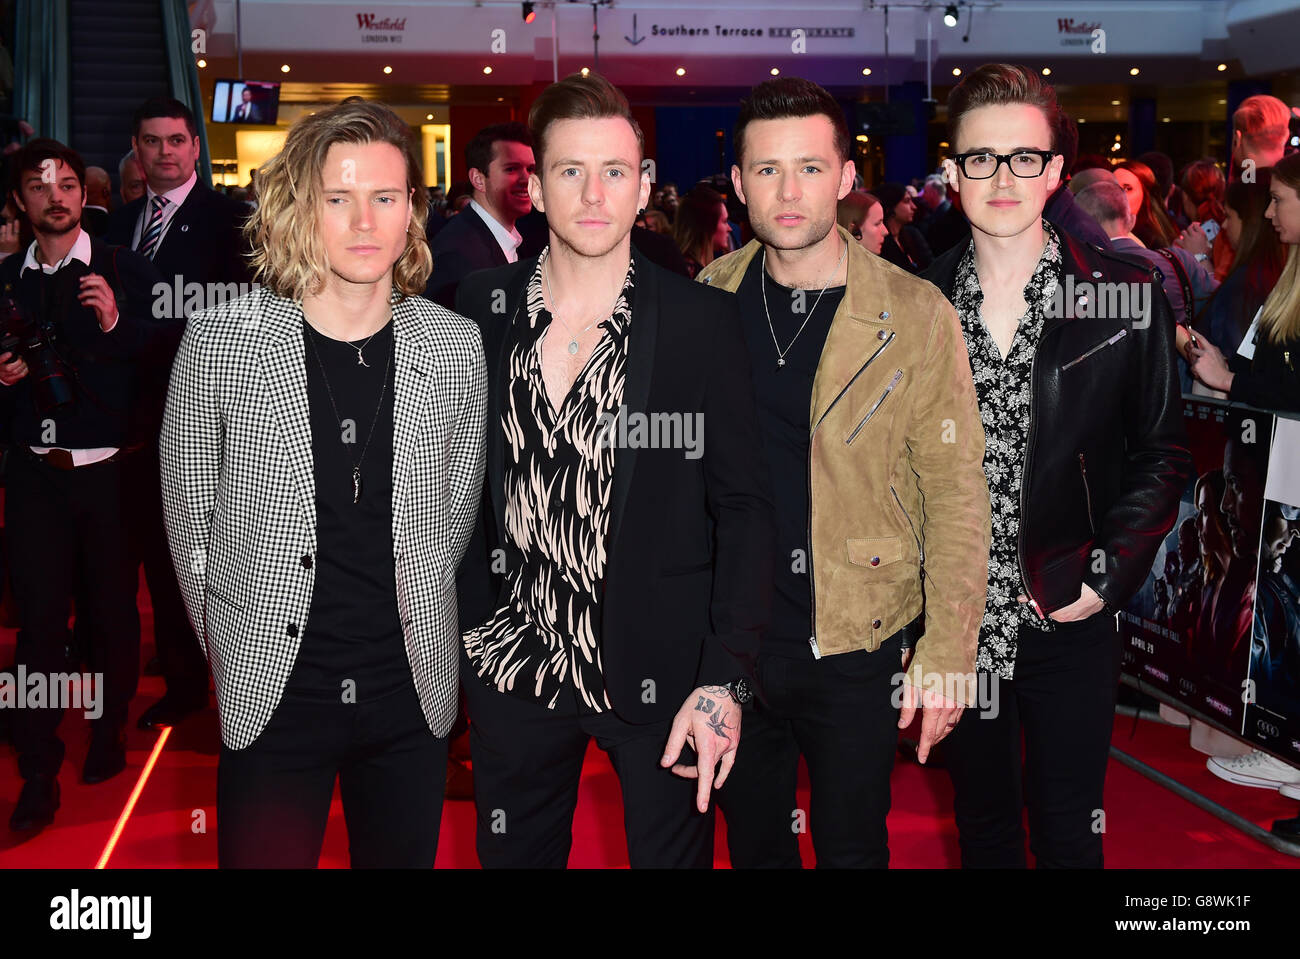 McFly (left to right) Dougie Poynter, Danny Jones, Harry Judd and Tom Fletcher attending the Captain America: Civil War European Premiere held at Vue Westfield in Shepherd's Bush, London. PRESS ASSOCIATION Photo. Picture date: Tuesday April 26, 2016. See PA story SHOWBIZ Captain. Photo credit should read: Ian West/PA Wire Stock Photo